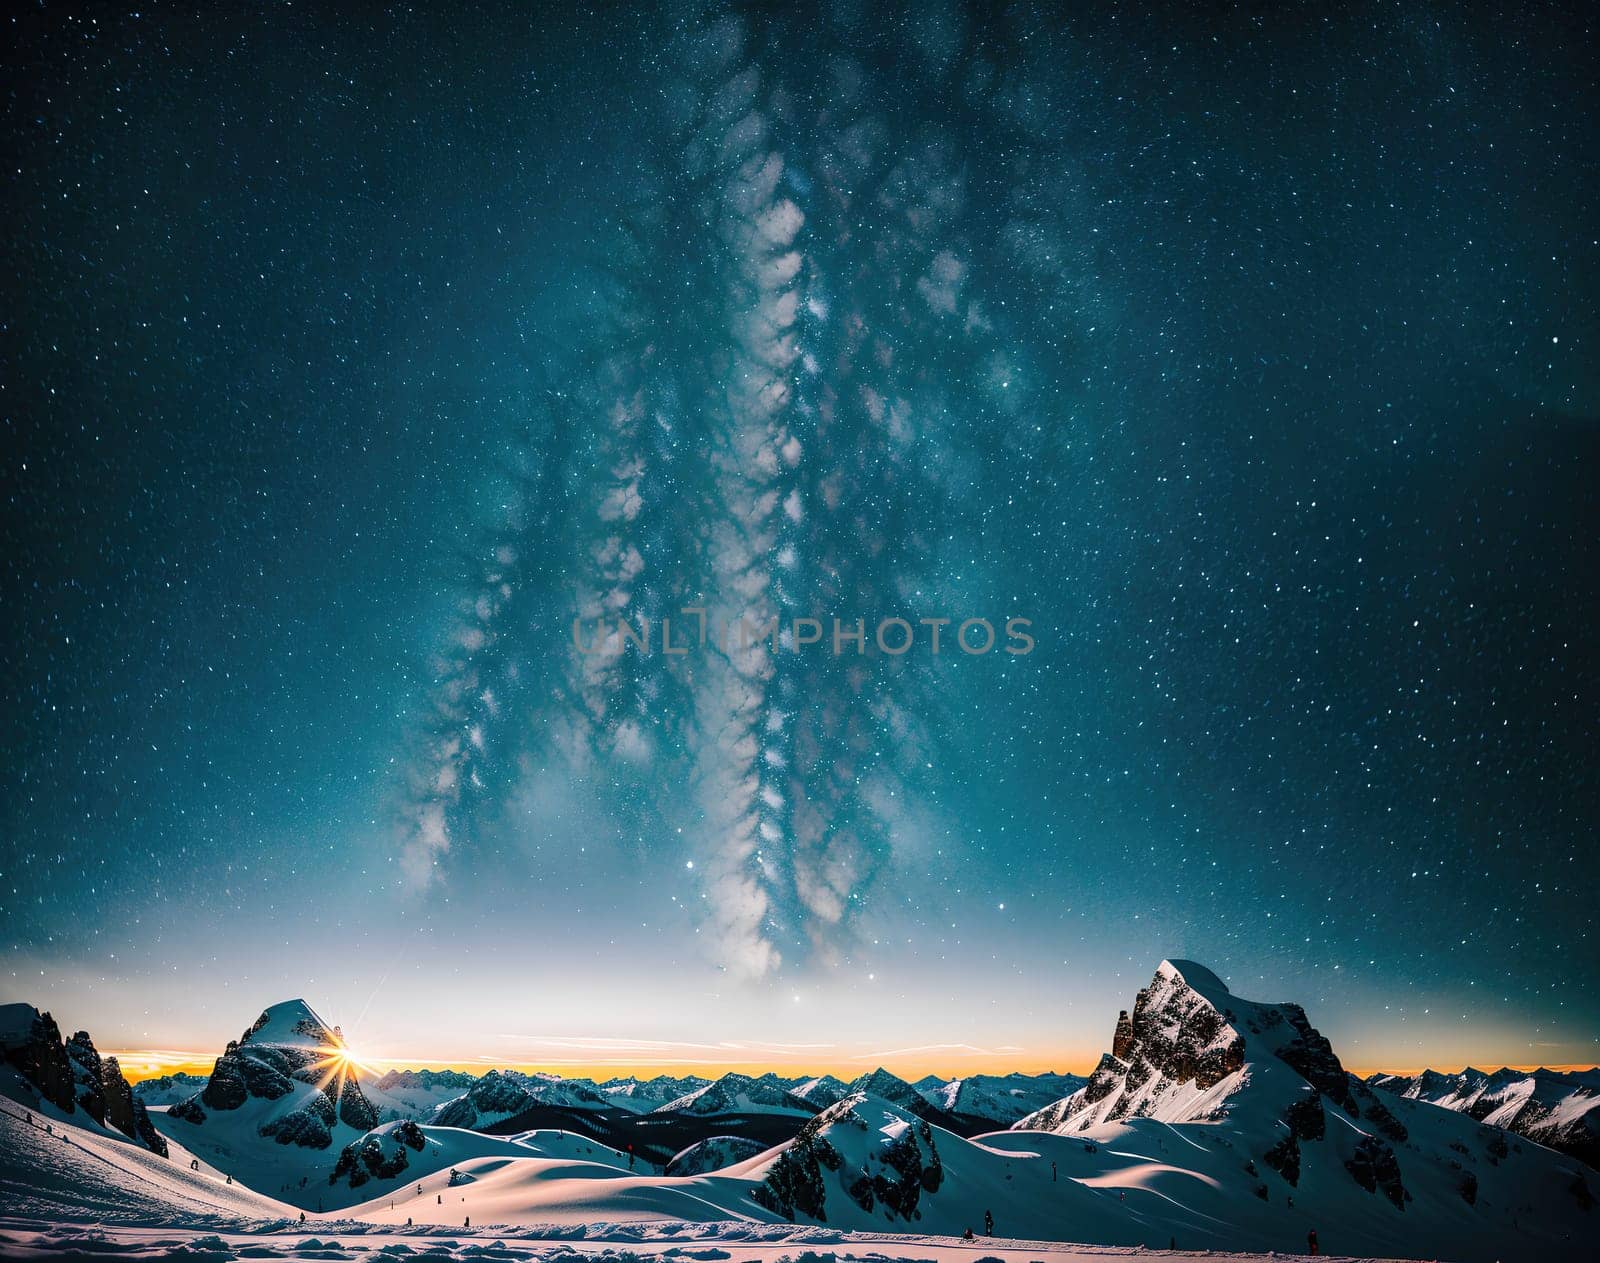 The image shows a snowy mountain landscape with a bright, starry sky above.